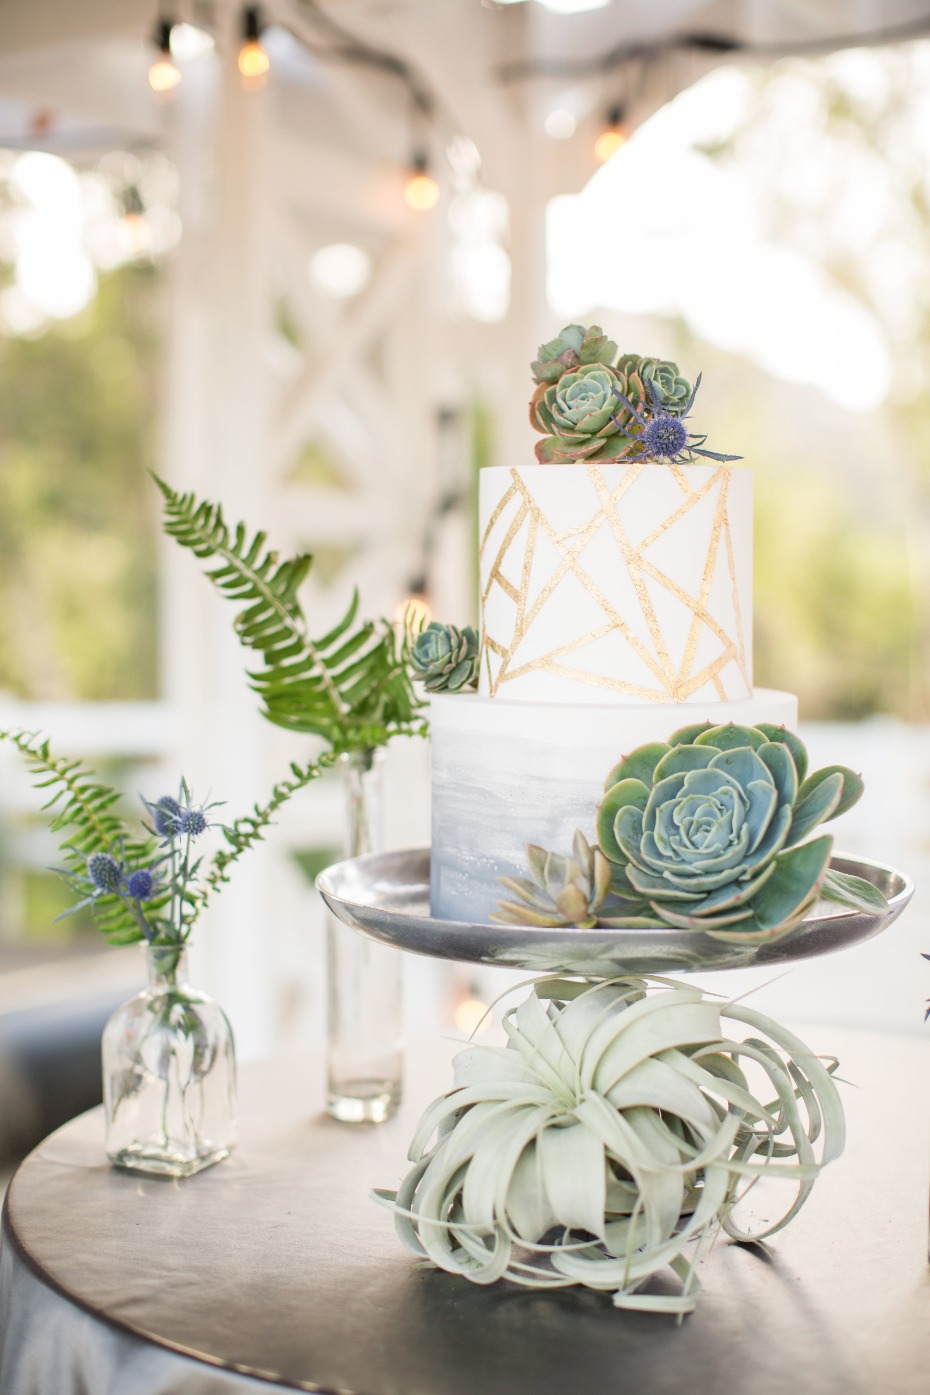 gold geometric wedding cake topped with succulents